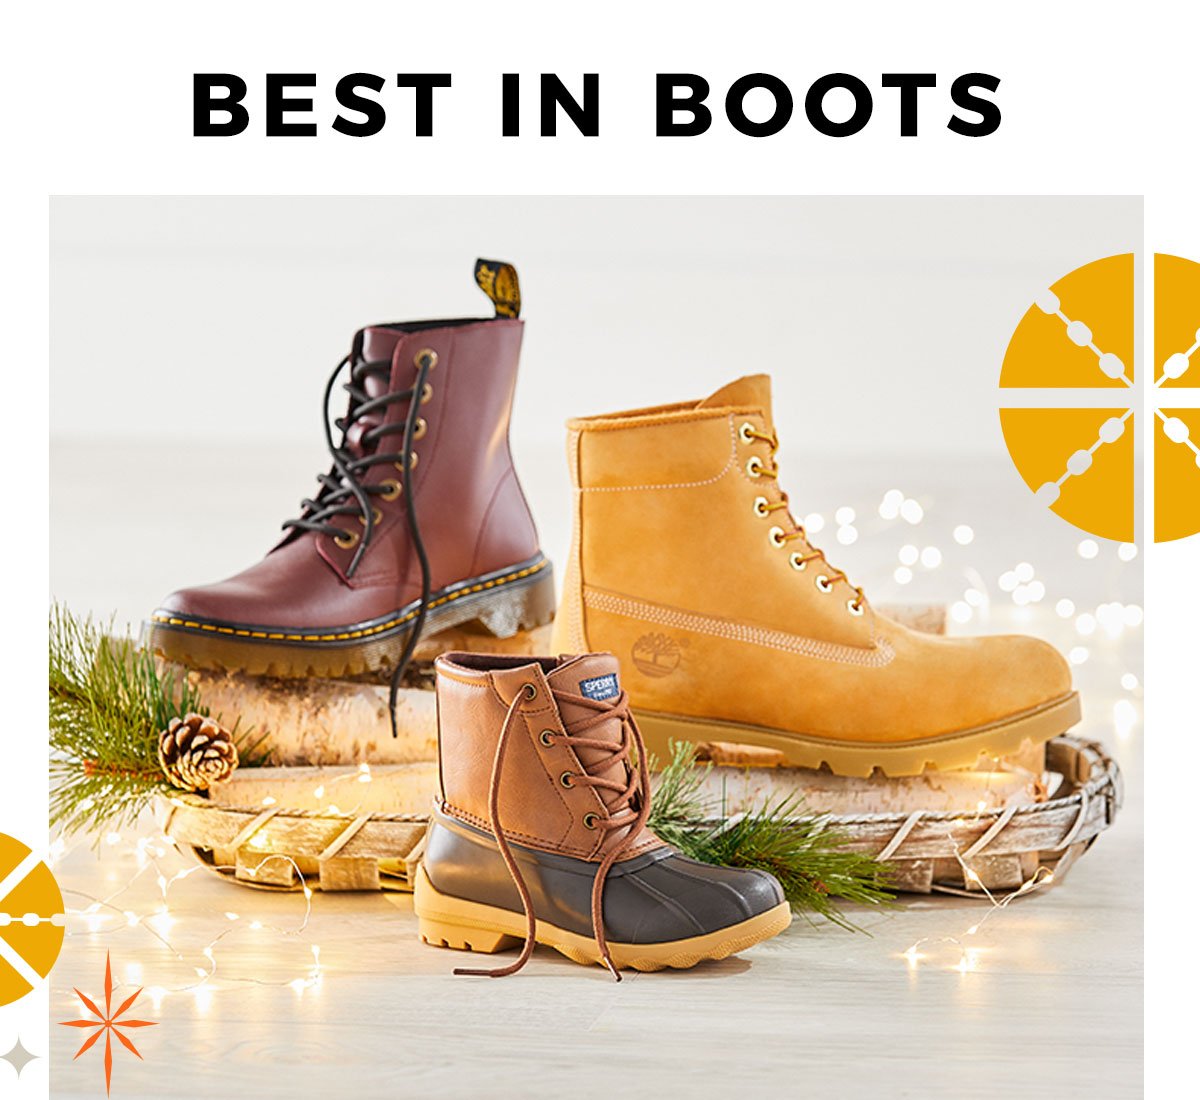 Give Merry with Timberland, Dr. Martens 